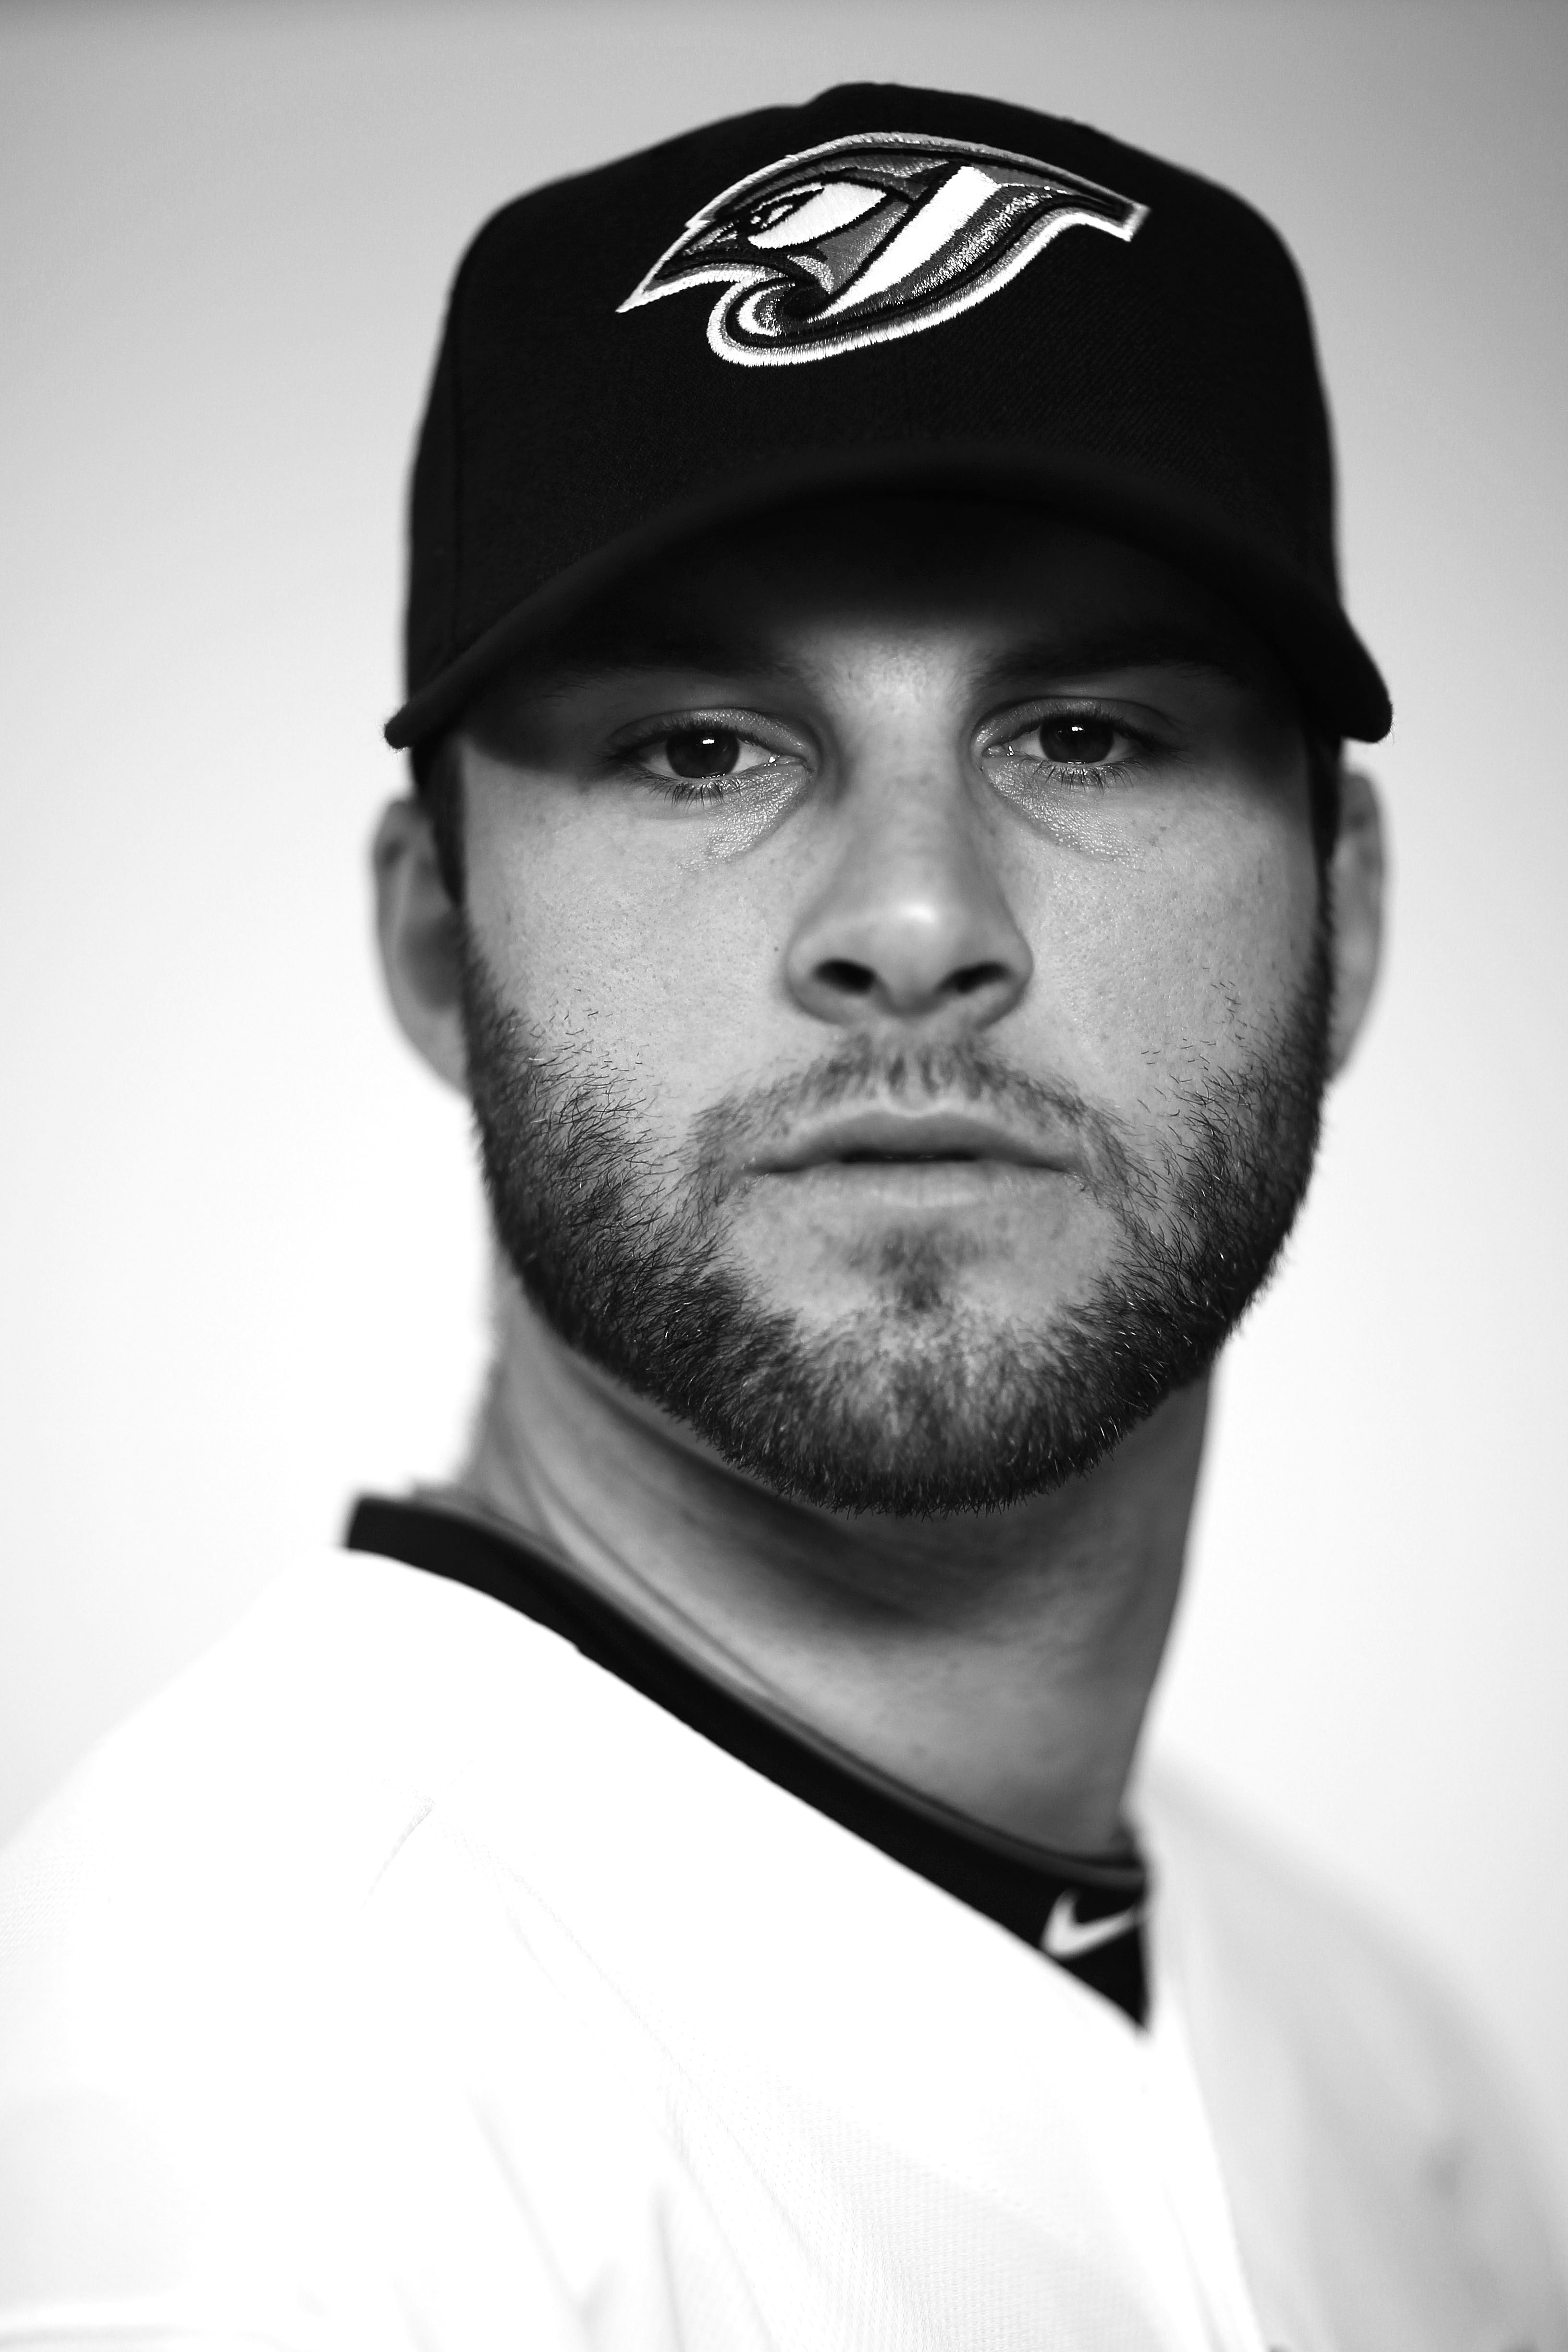 DUNEDIN, FL - FEBRUARY 20:      (EDITORS NOTE: Image has been converted to black and white.) Brandon Morrow #23 of the Toronto Blue Jays poses during photo day at Florida Auto Exchange Stadium on February 20, 2011 in Dunedin, Florida.  (Photo by Nick Laha